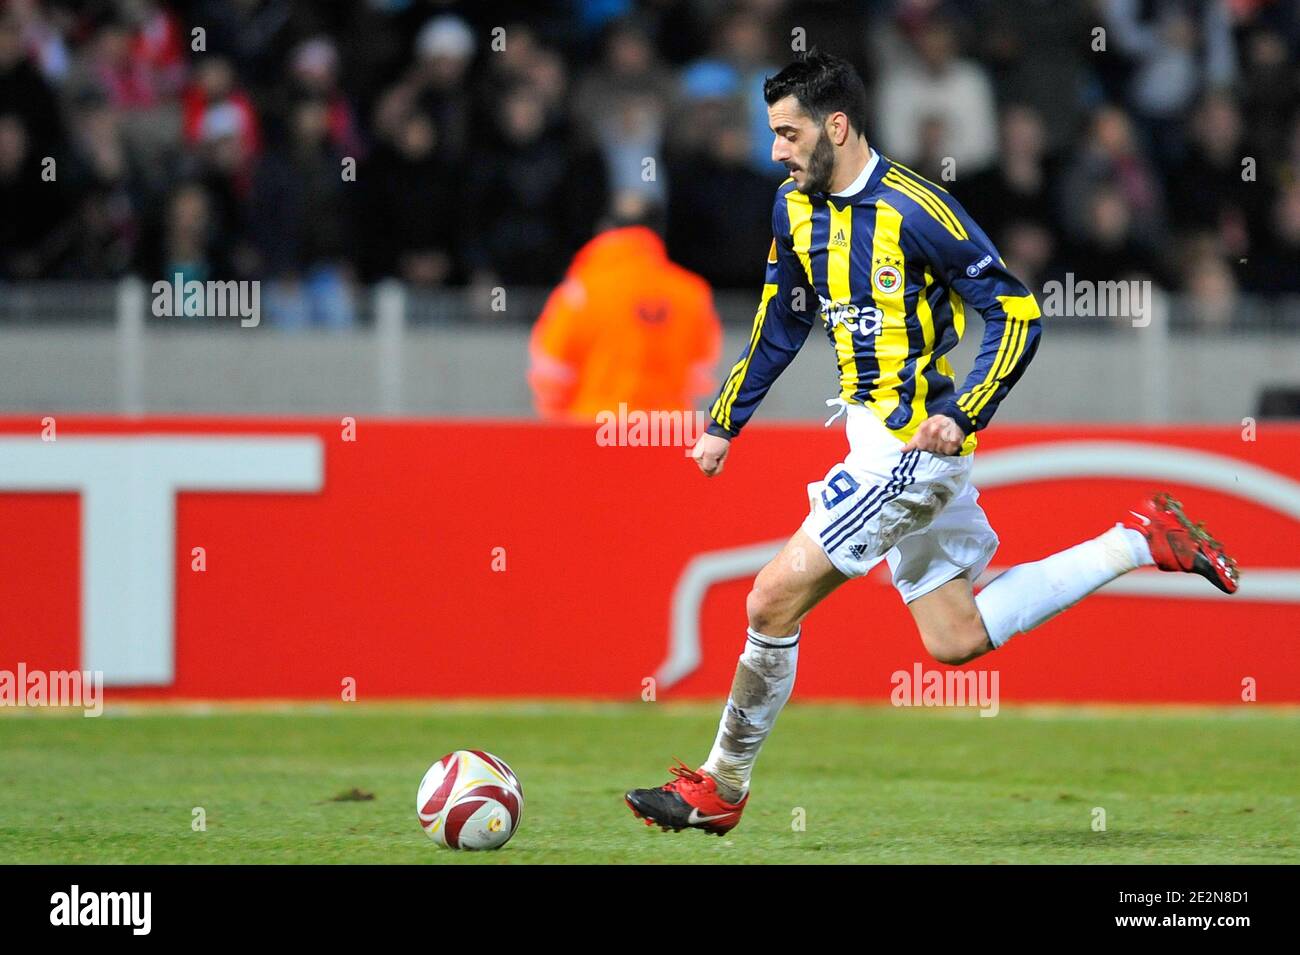 Fenerbahce's Daniel Guiza during the UEFA Europa League soccer match, LOSC Lille Metropole vs Fenerbahce SK at the Stadium Nord in Villeneuve d'Ascq, France on February 18, 2010. Lille won 2-1. Photo by Stephane Reix/ABACAPRESS.COM Stock Photo